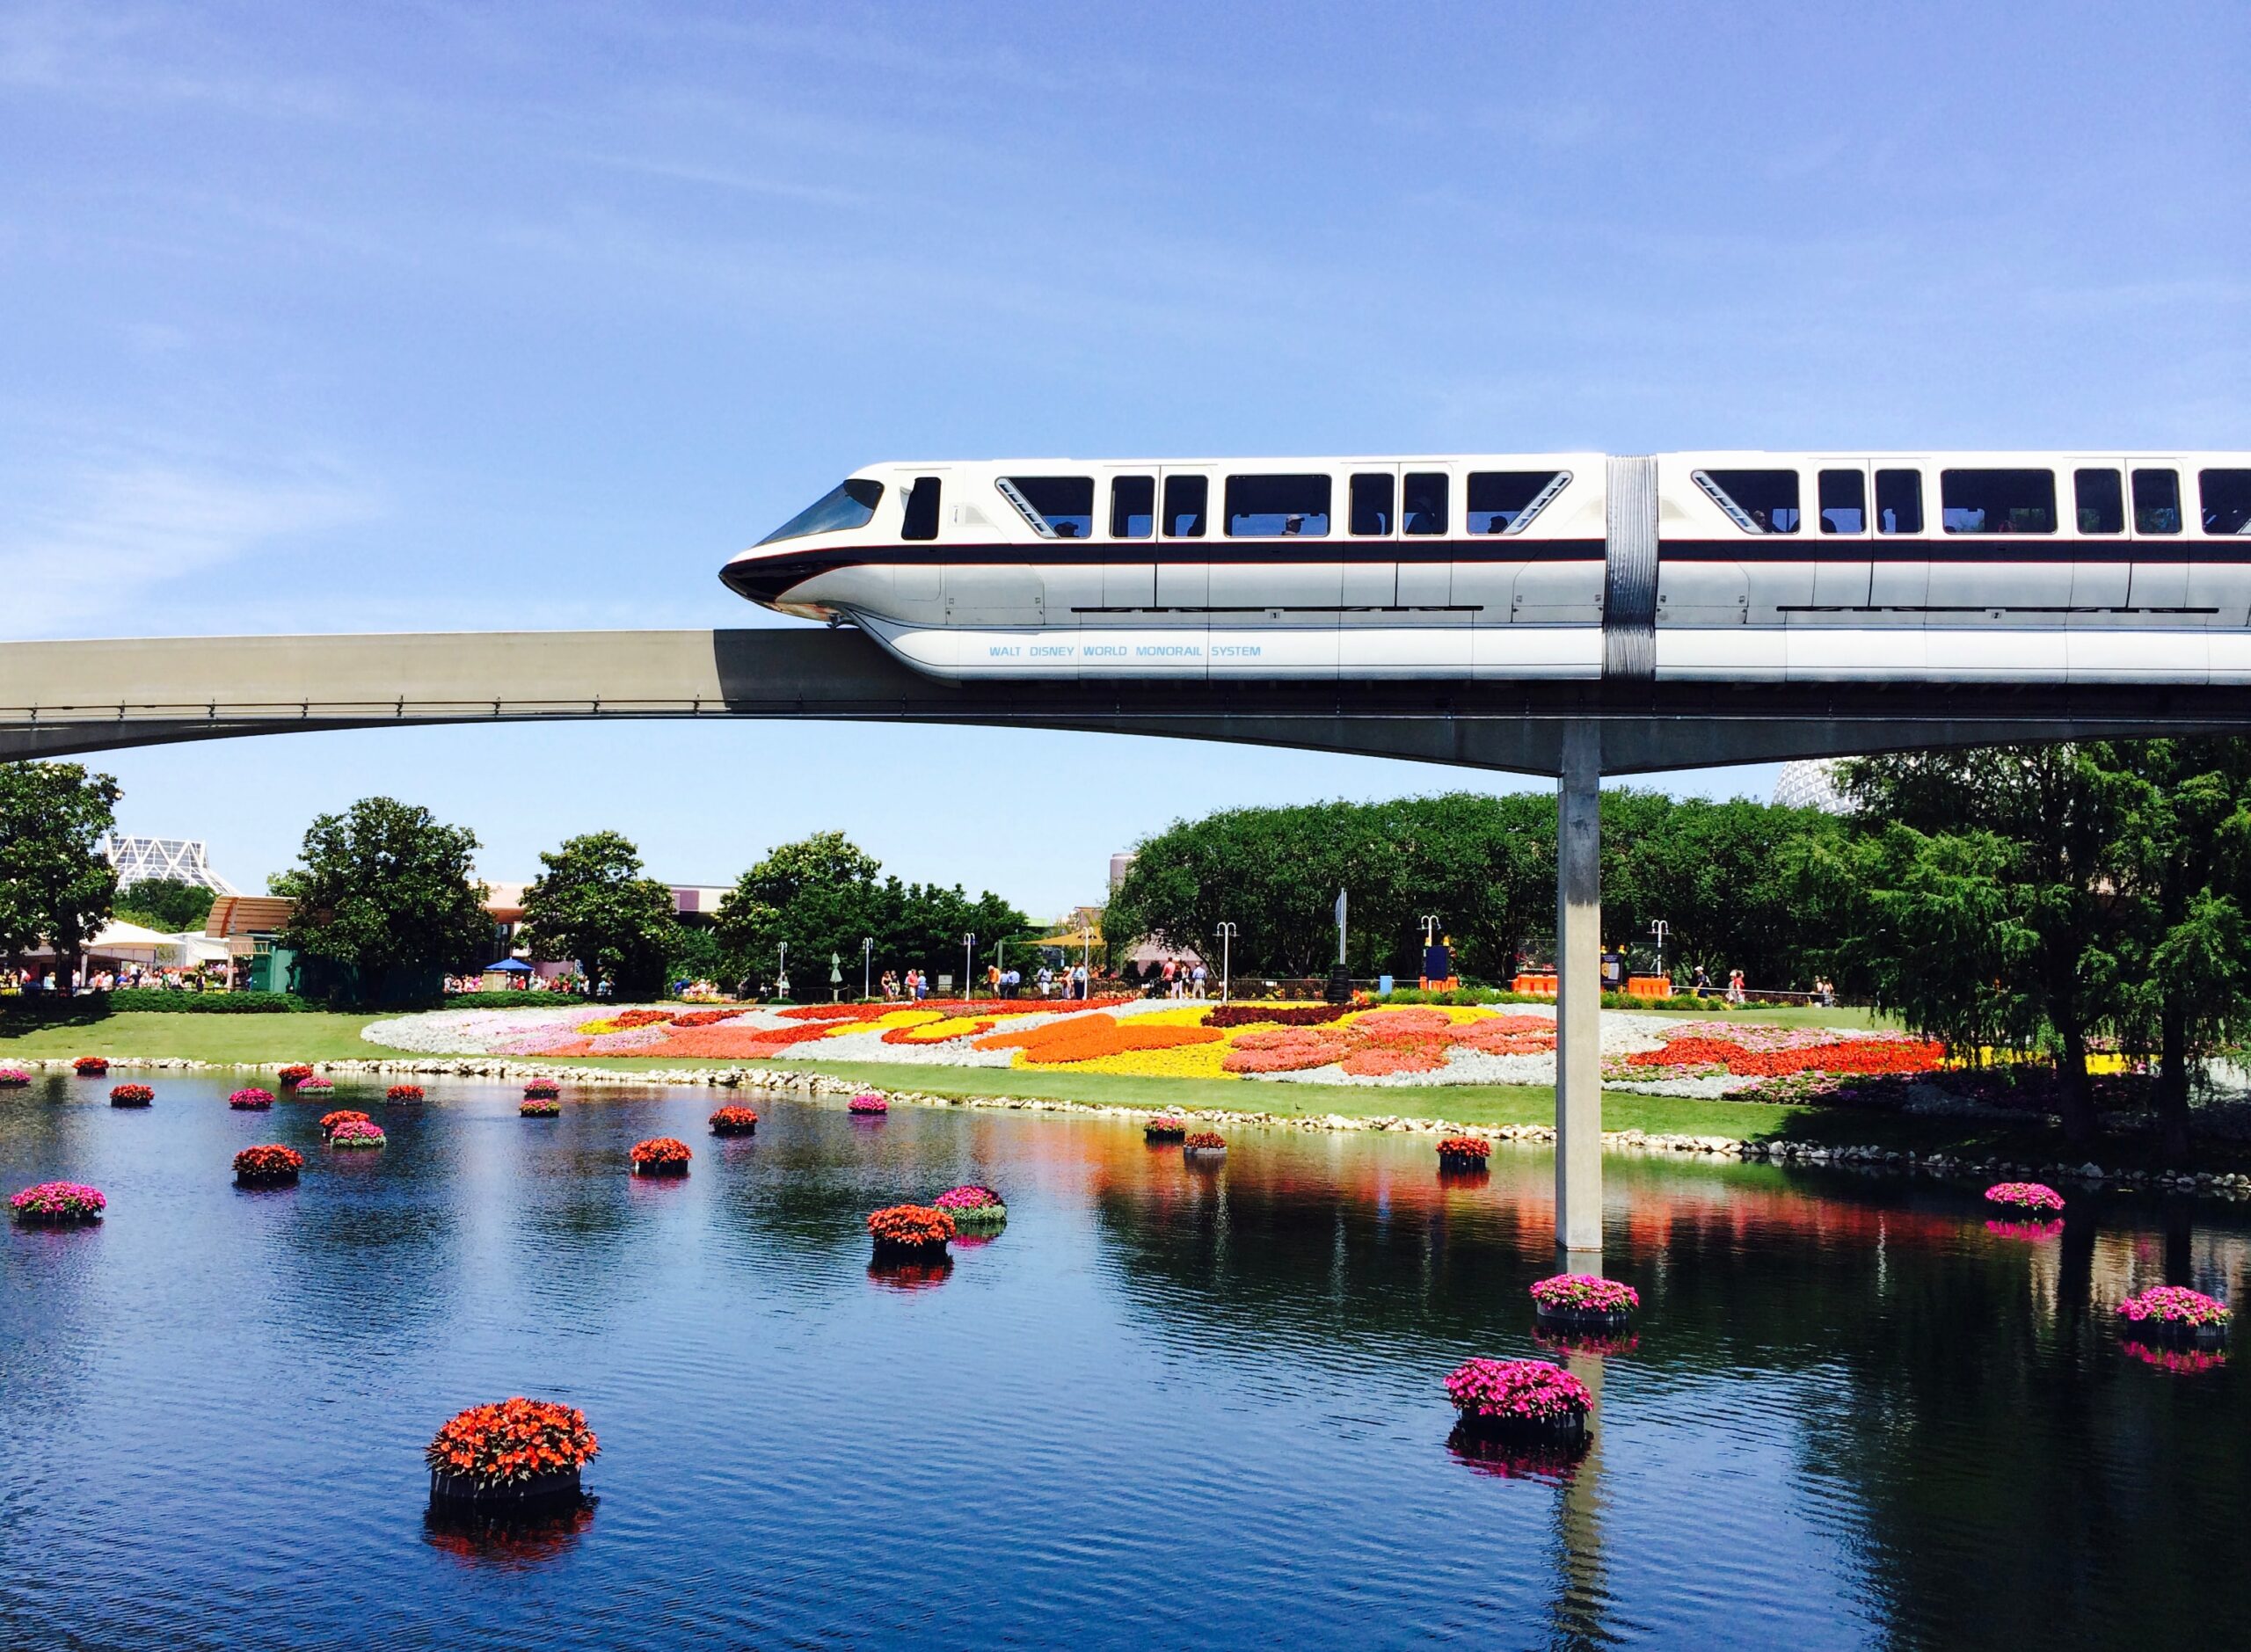 Monorails are a free Disney World attraction